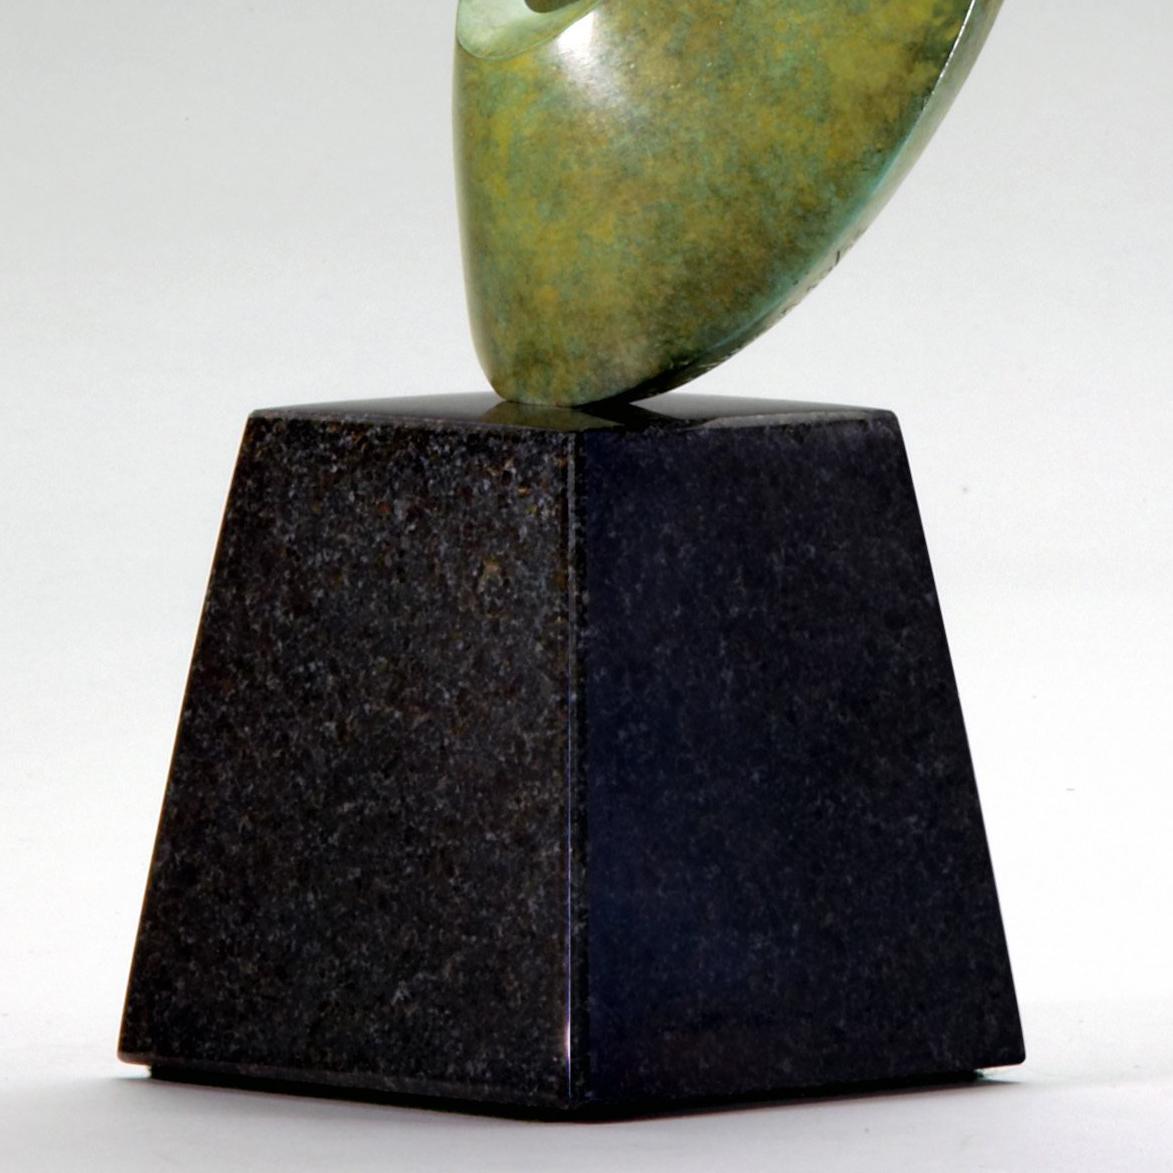 Calypso, Interior Abstract Bronze on Stone Base - Gold Abstract Sculpture by Richard Erdman